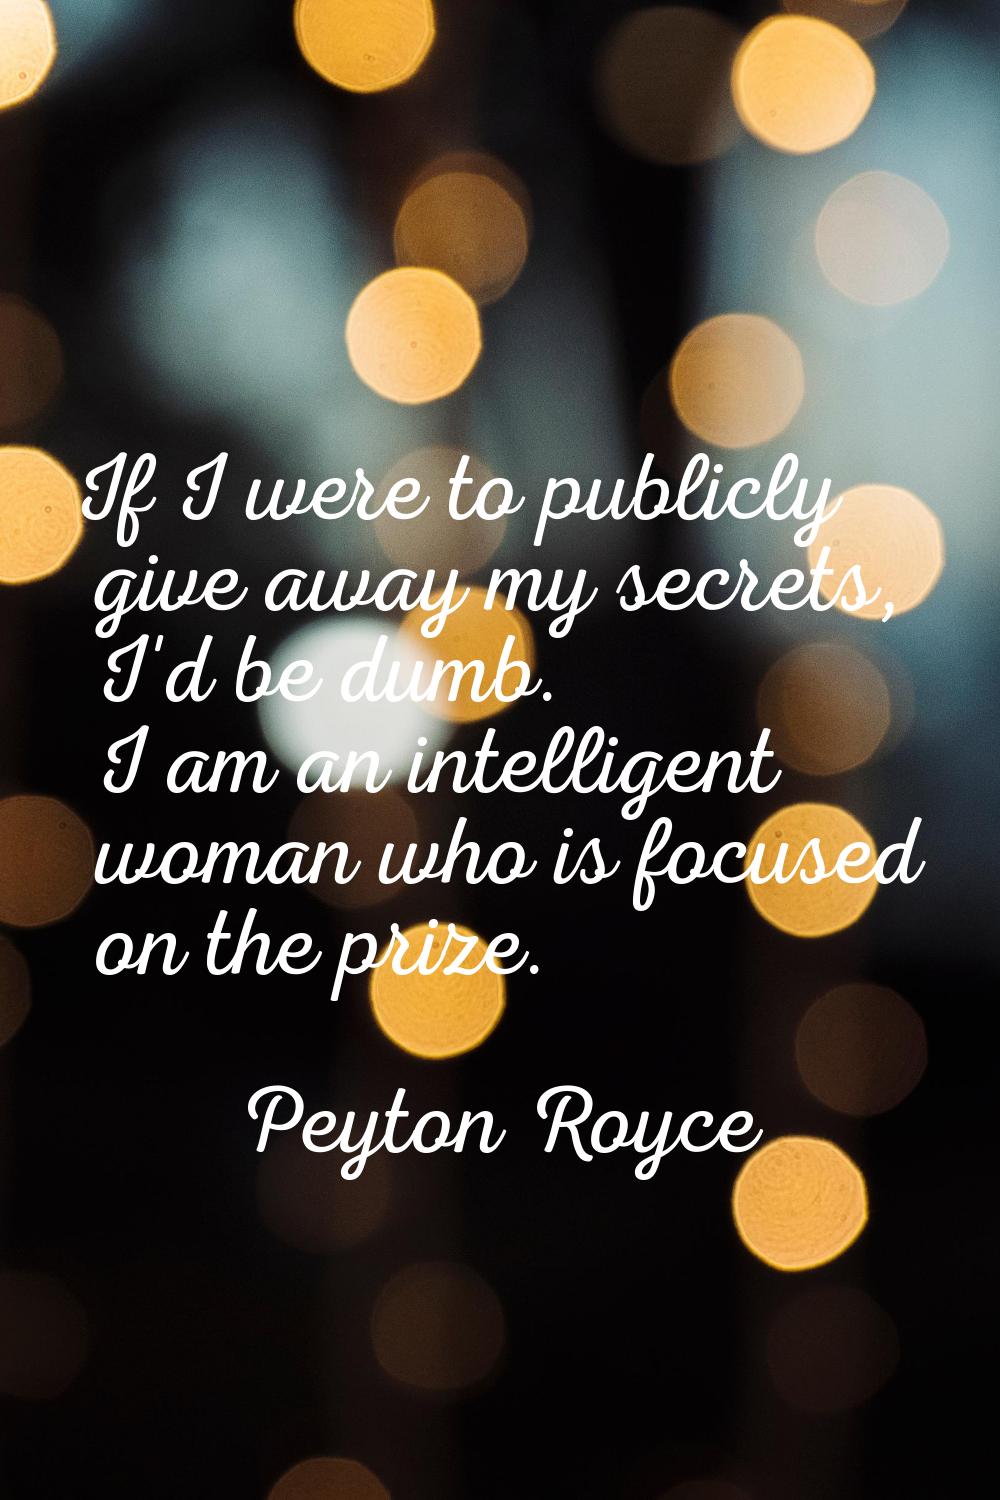 If I were to publicly give away my secrets, I'd be dumb. I am an intelligent woman who is focused o